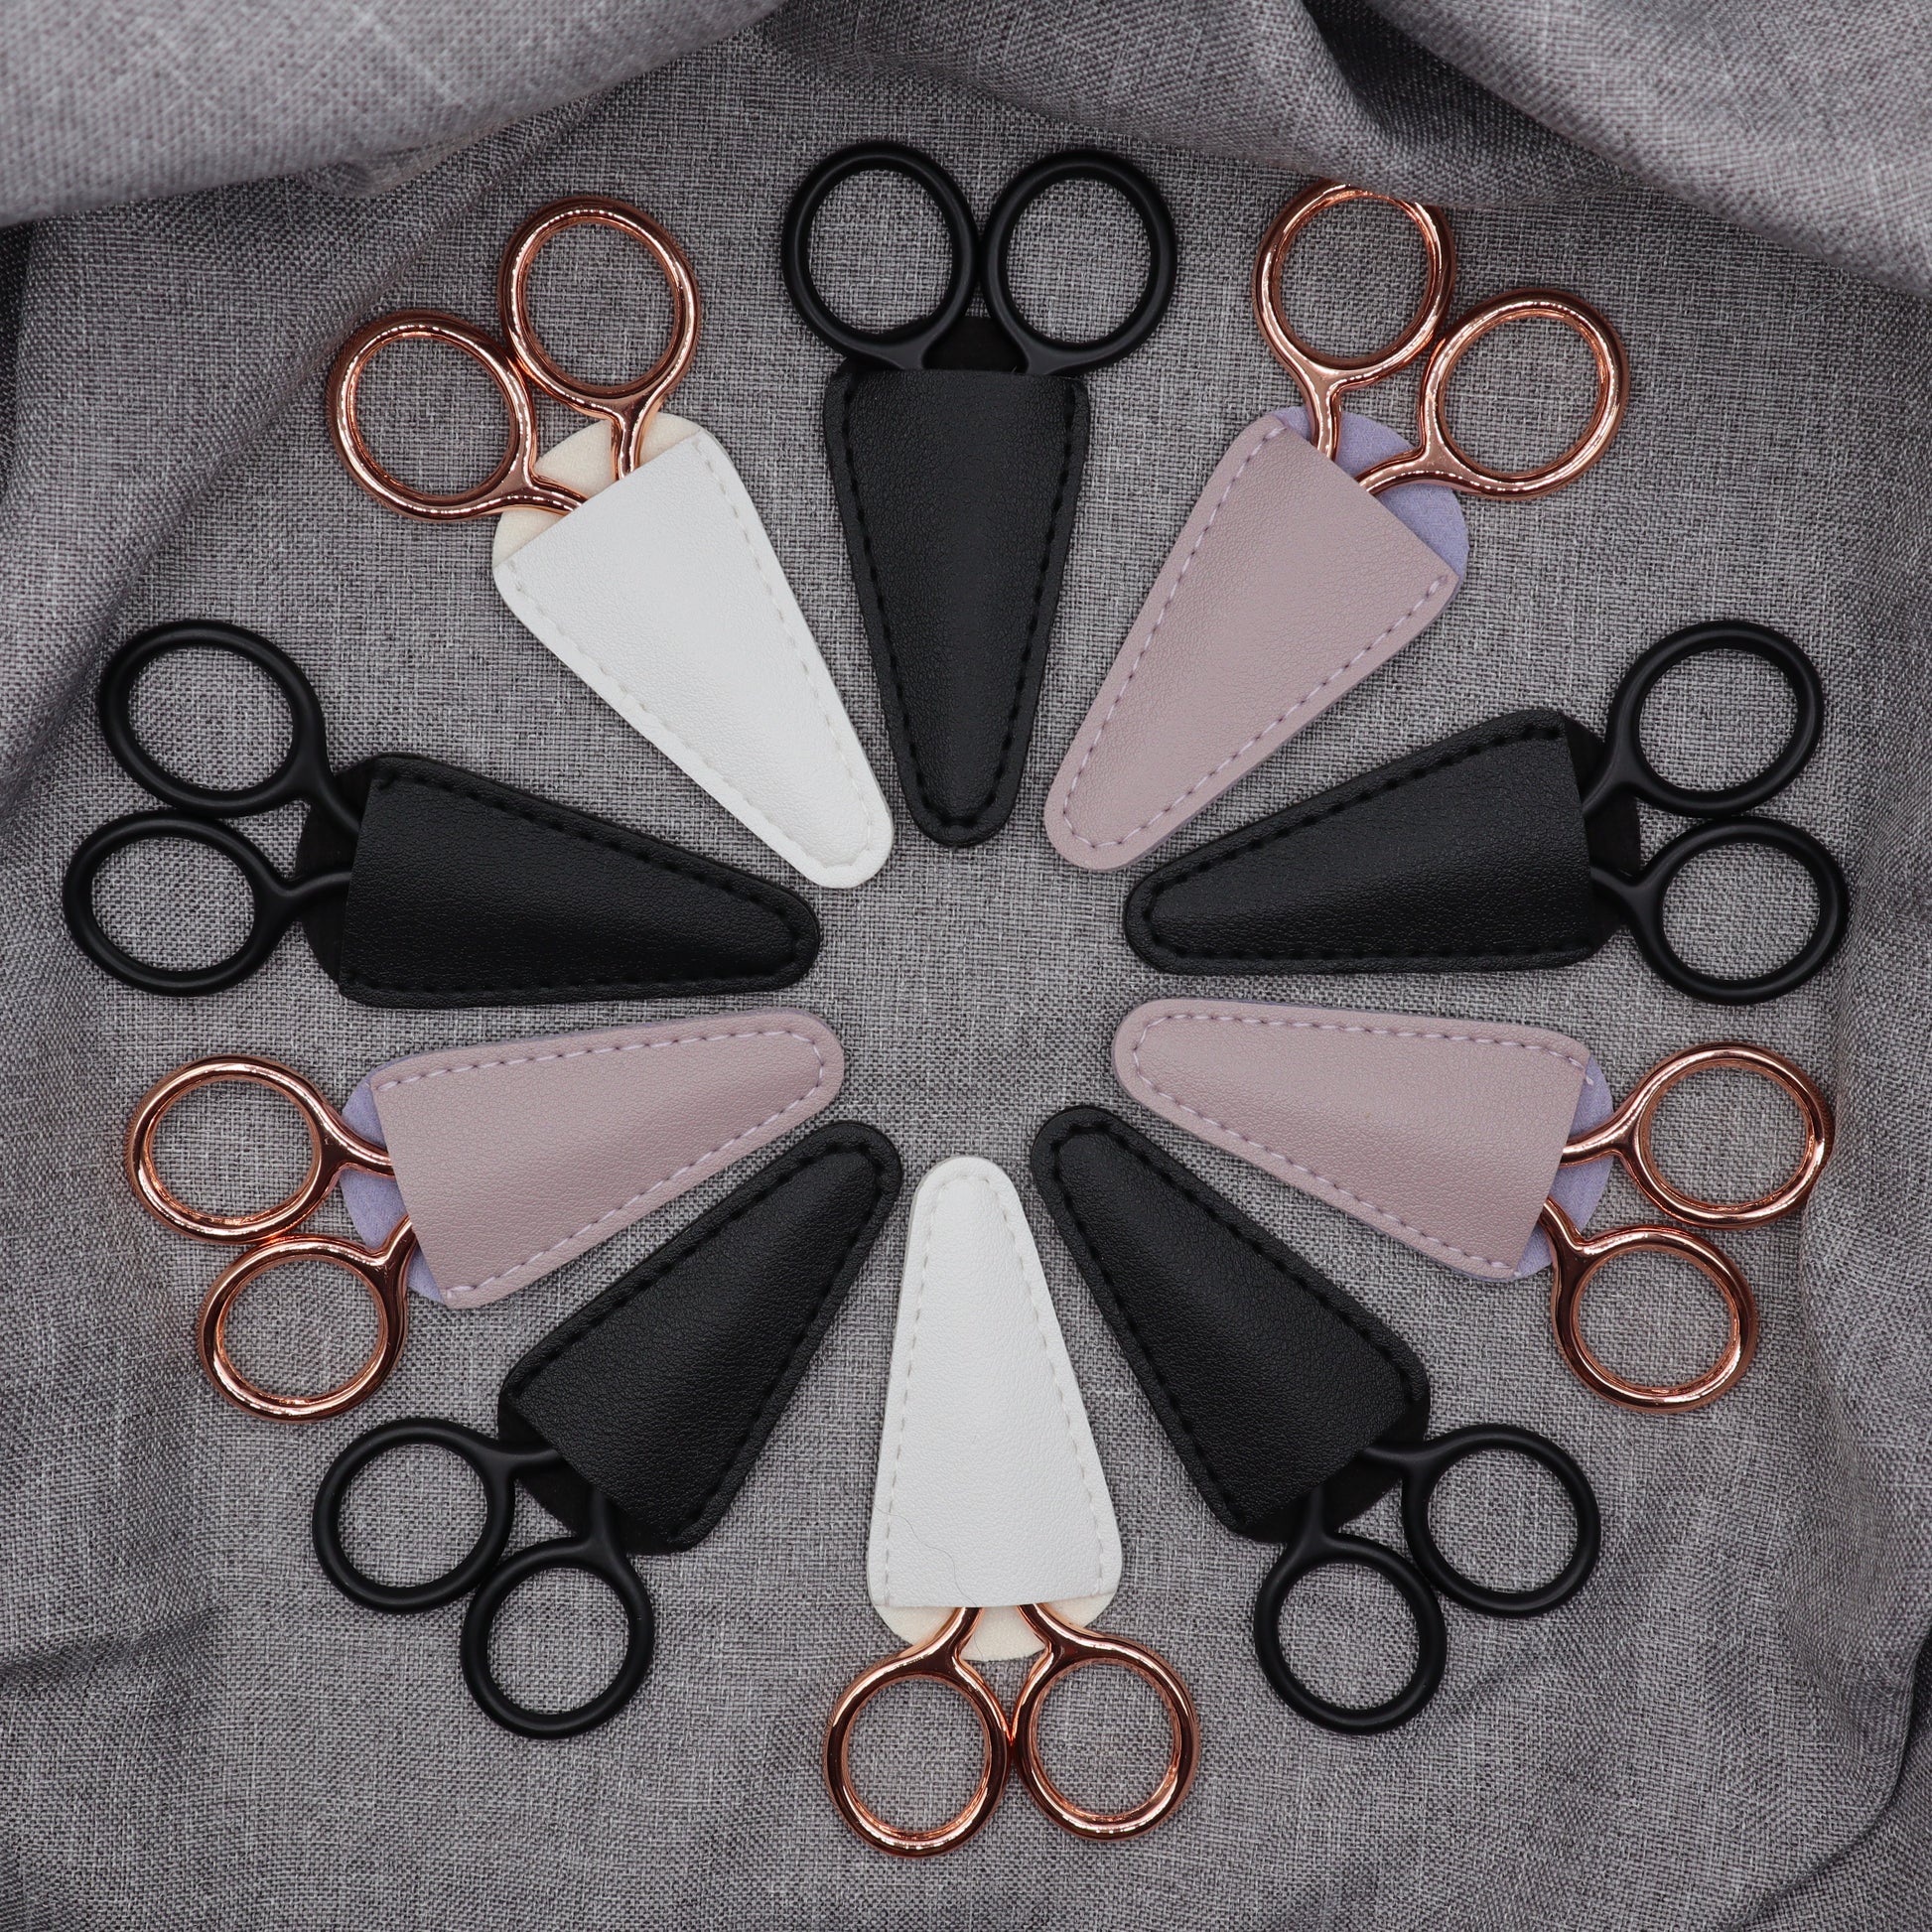 Embroidery Scissors with Protective Faux Leather Sheath - Natural Fibre Arts